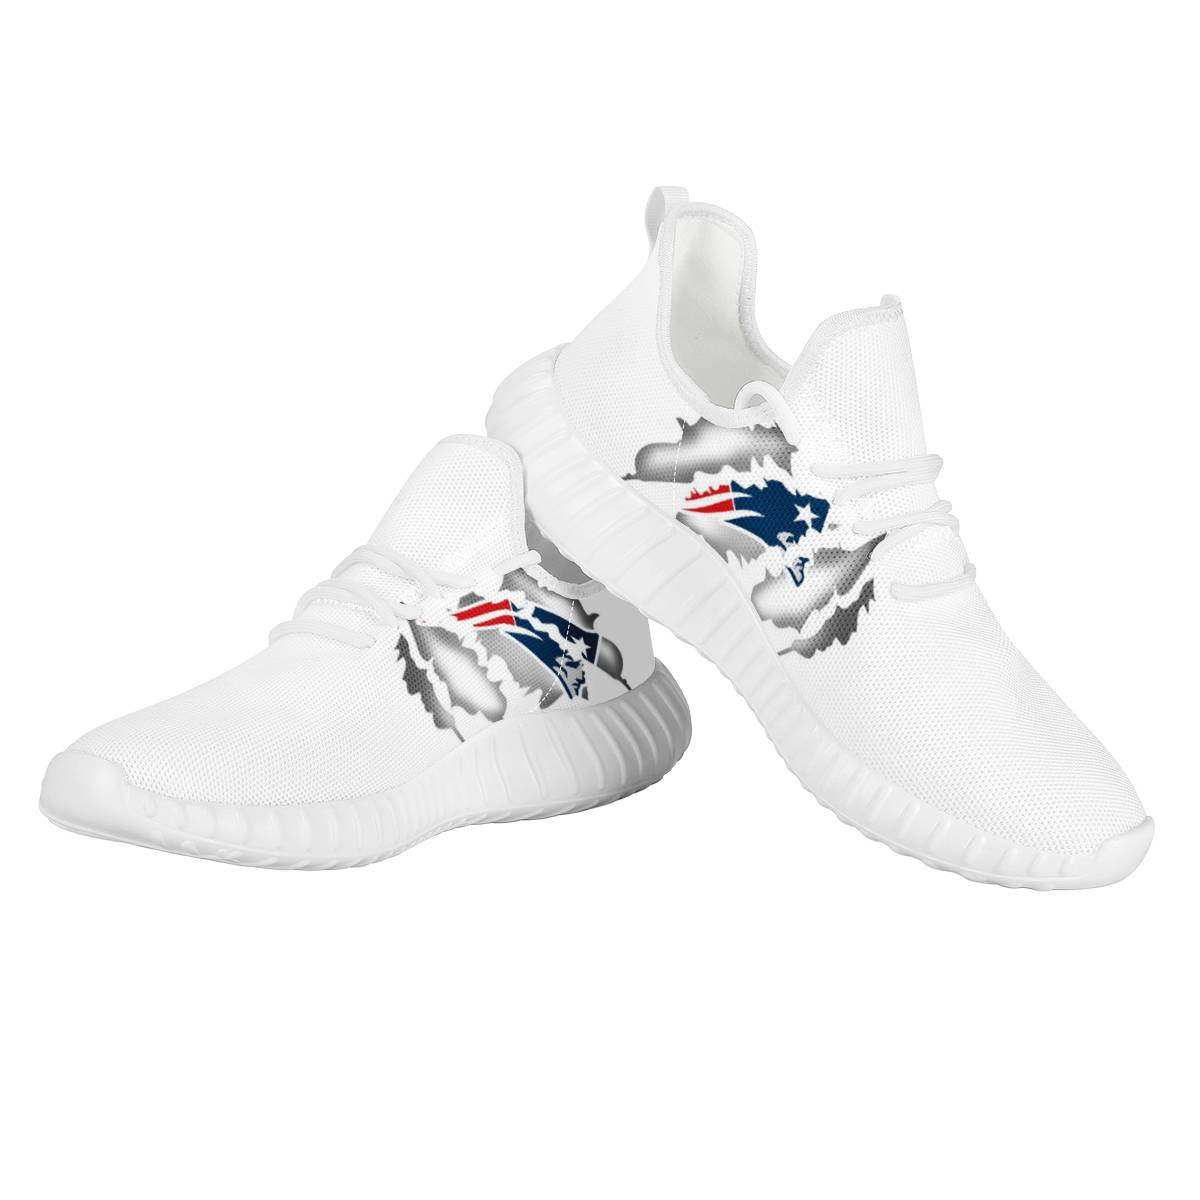 Men's New England Patriots Mesh Knit Sneakers/Shoes 014